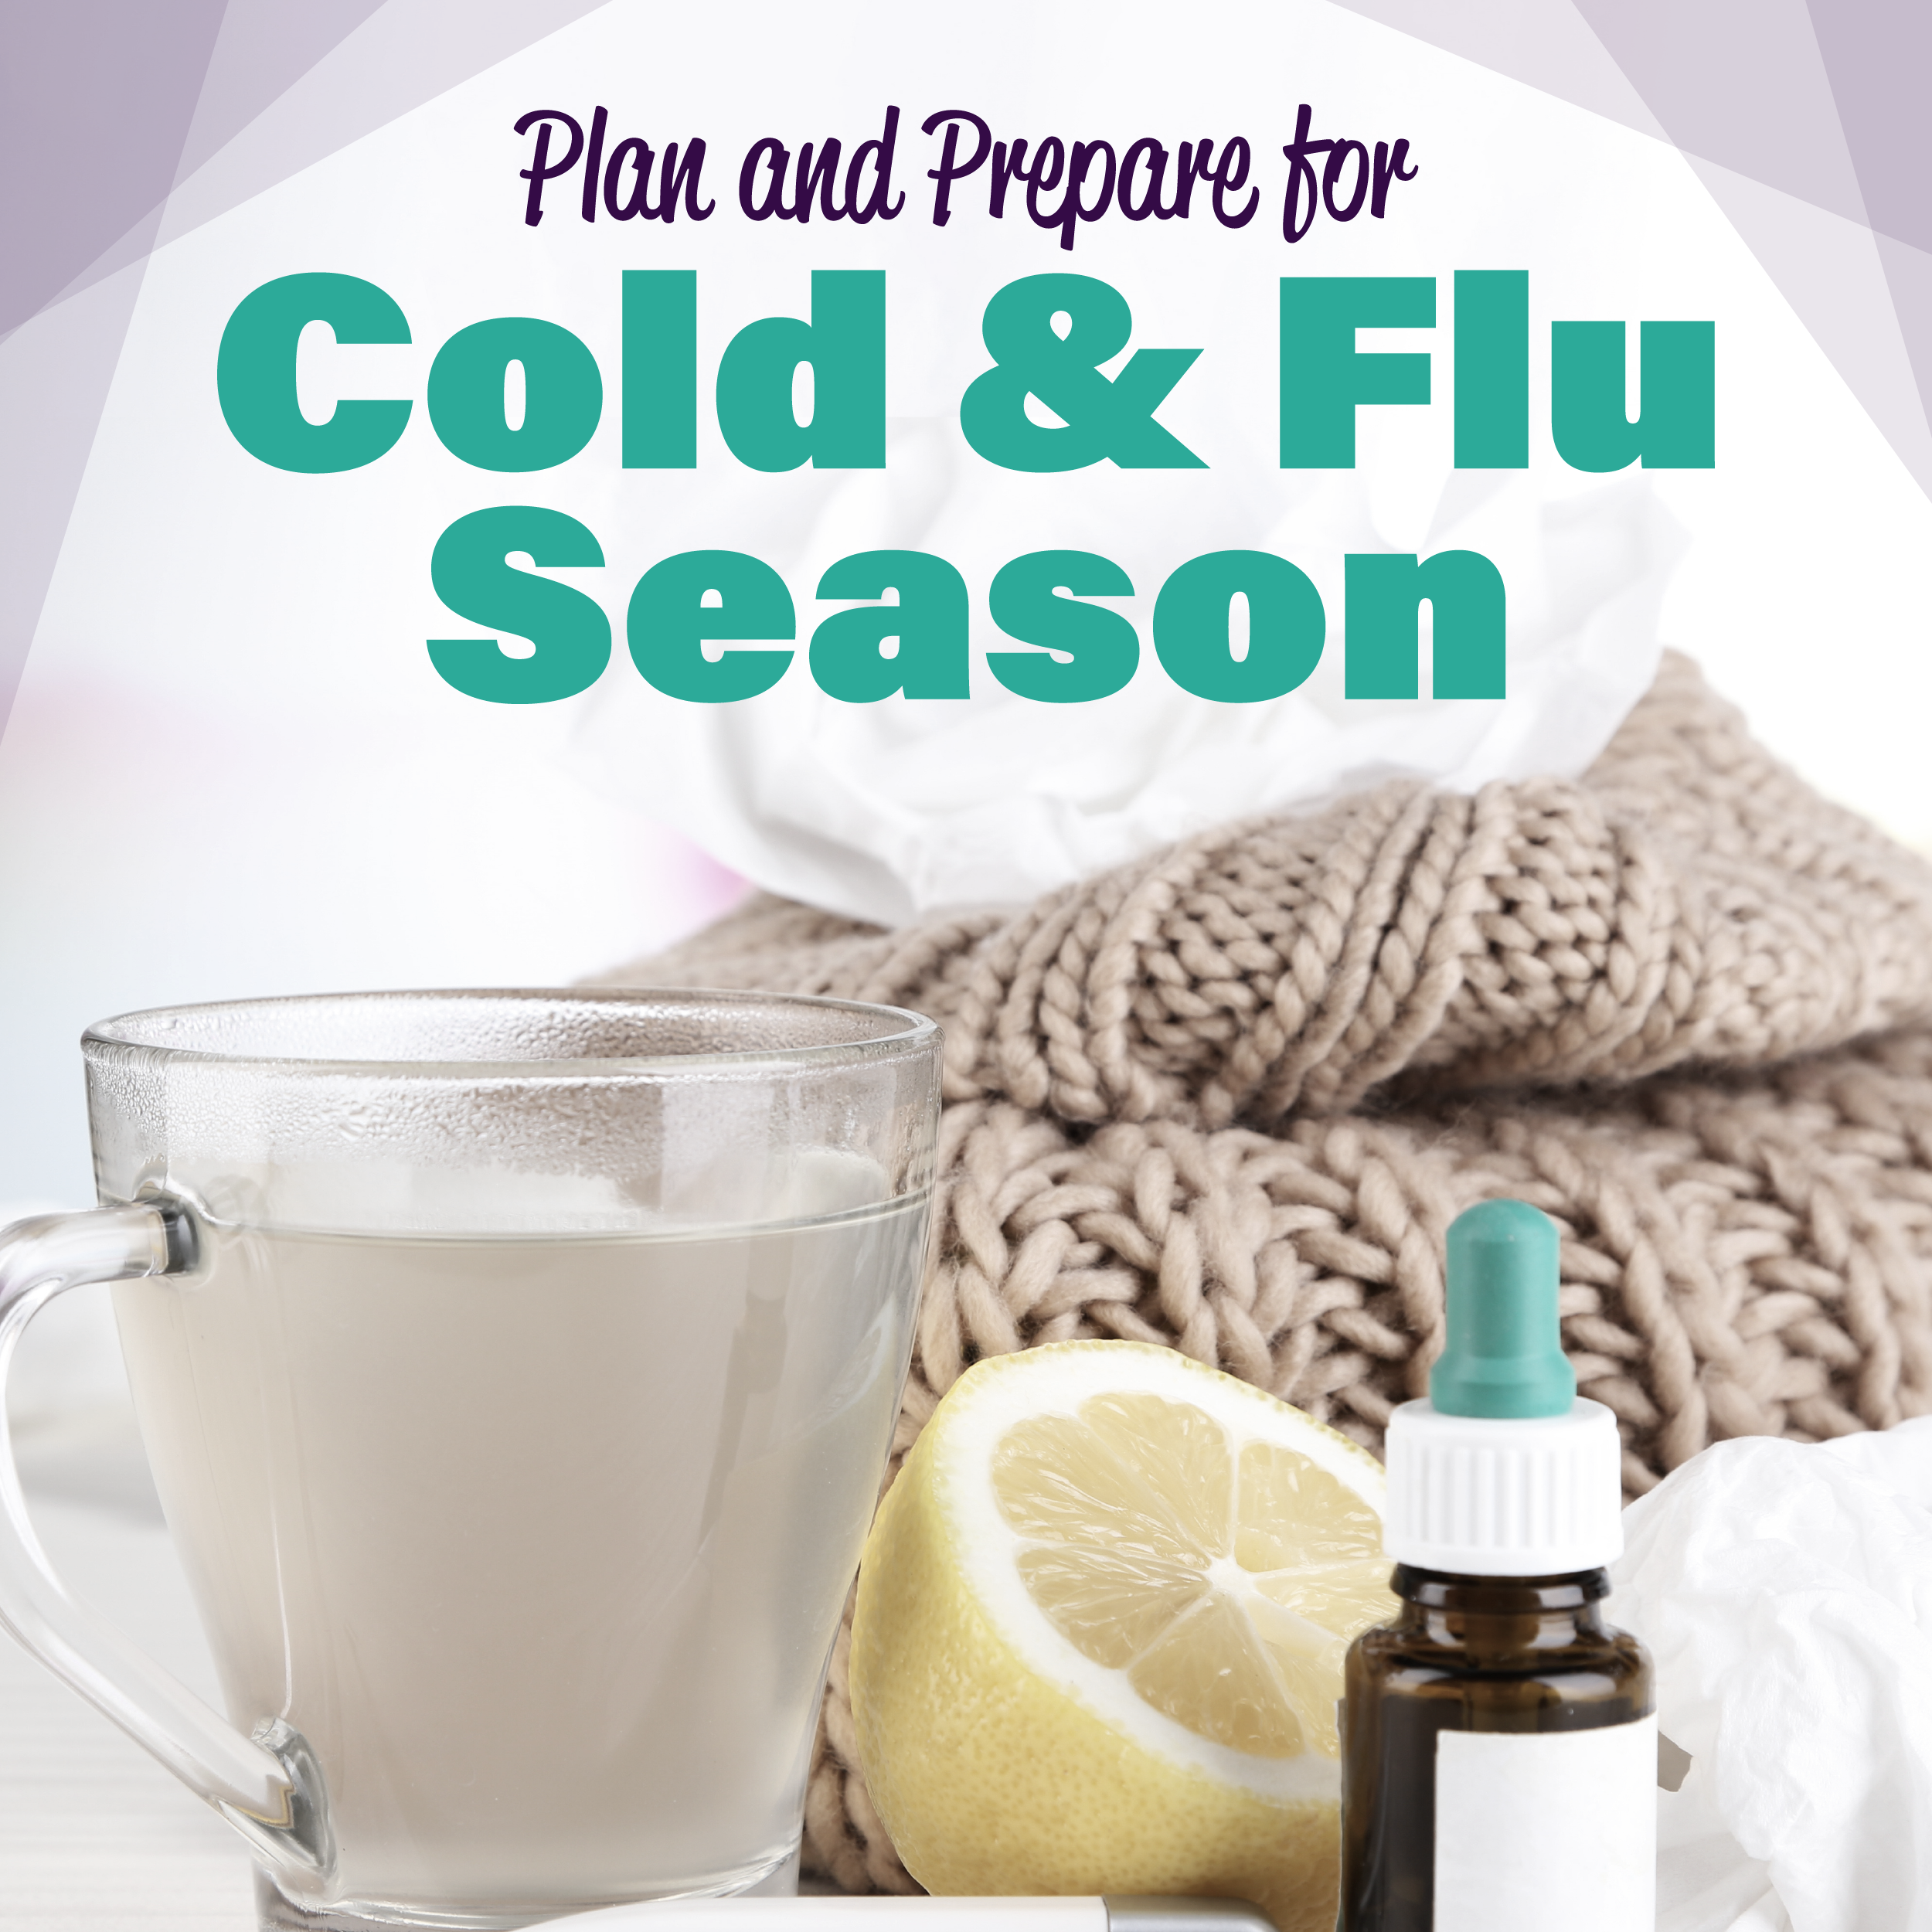 Plan and Prepare for Cold and Flu Season